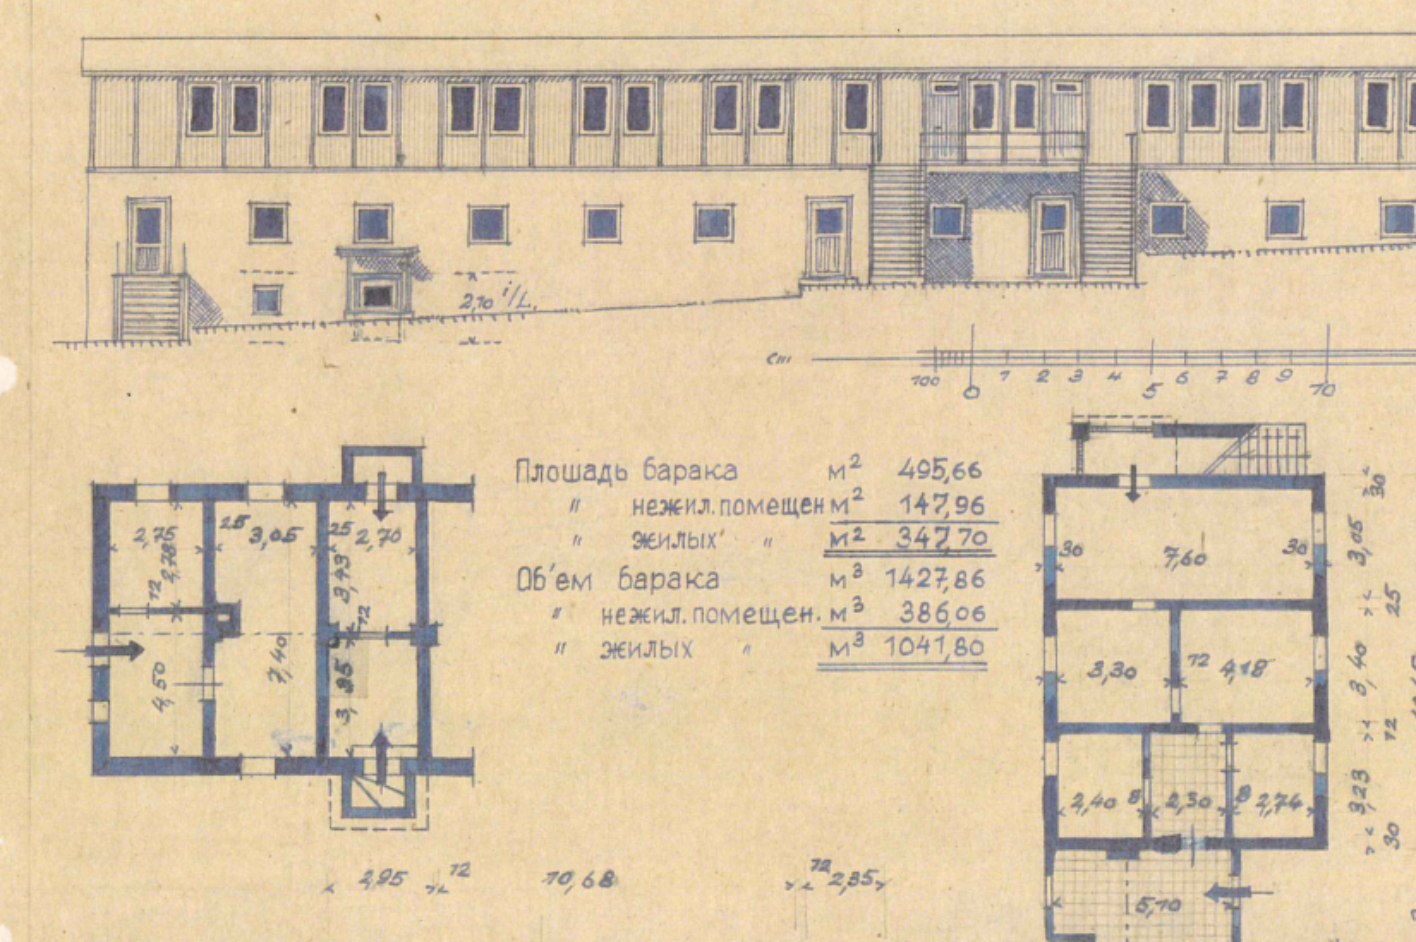 A schematic drawing of the lazaretto. It is a flat, long building with two floors. Due to the slightly sloping position, the windows on the right side are near the ground, while on the left side stairs lead up to the door. In the middle, stairs also lead up to the doors on the second floor. At the top, large windows are regularly arranged in pairs, while at the bottom, smaller windows are more widely spaced. Below the drawing there are two floor plans with lengths, as well as a list about the area with square meters and Cyrillic inscriptions.